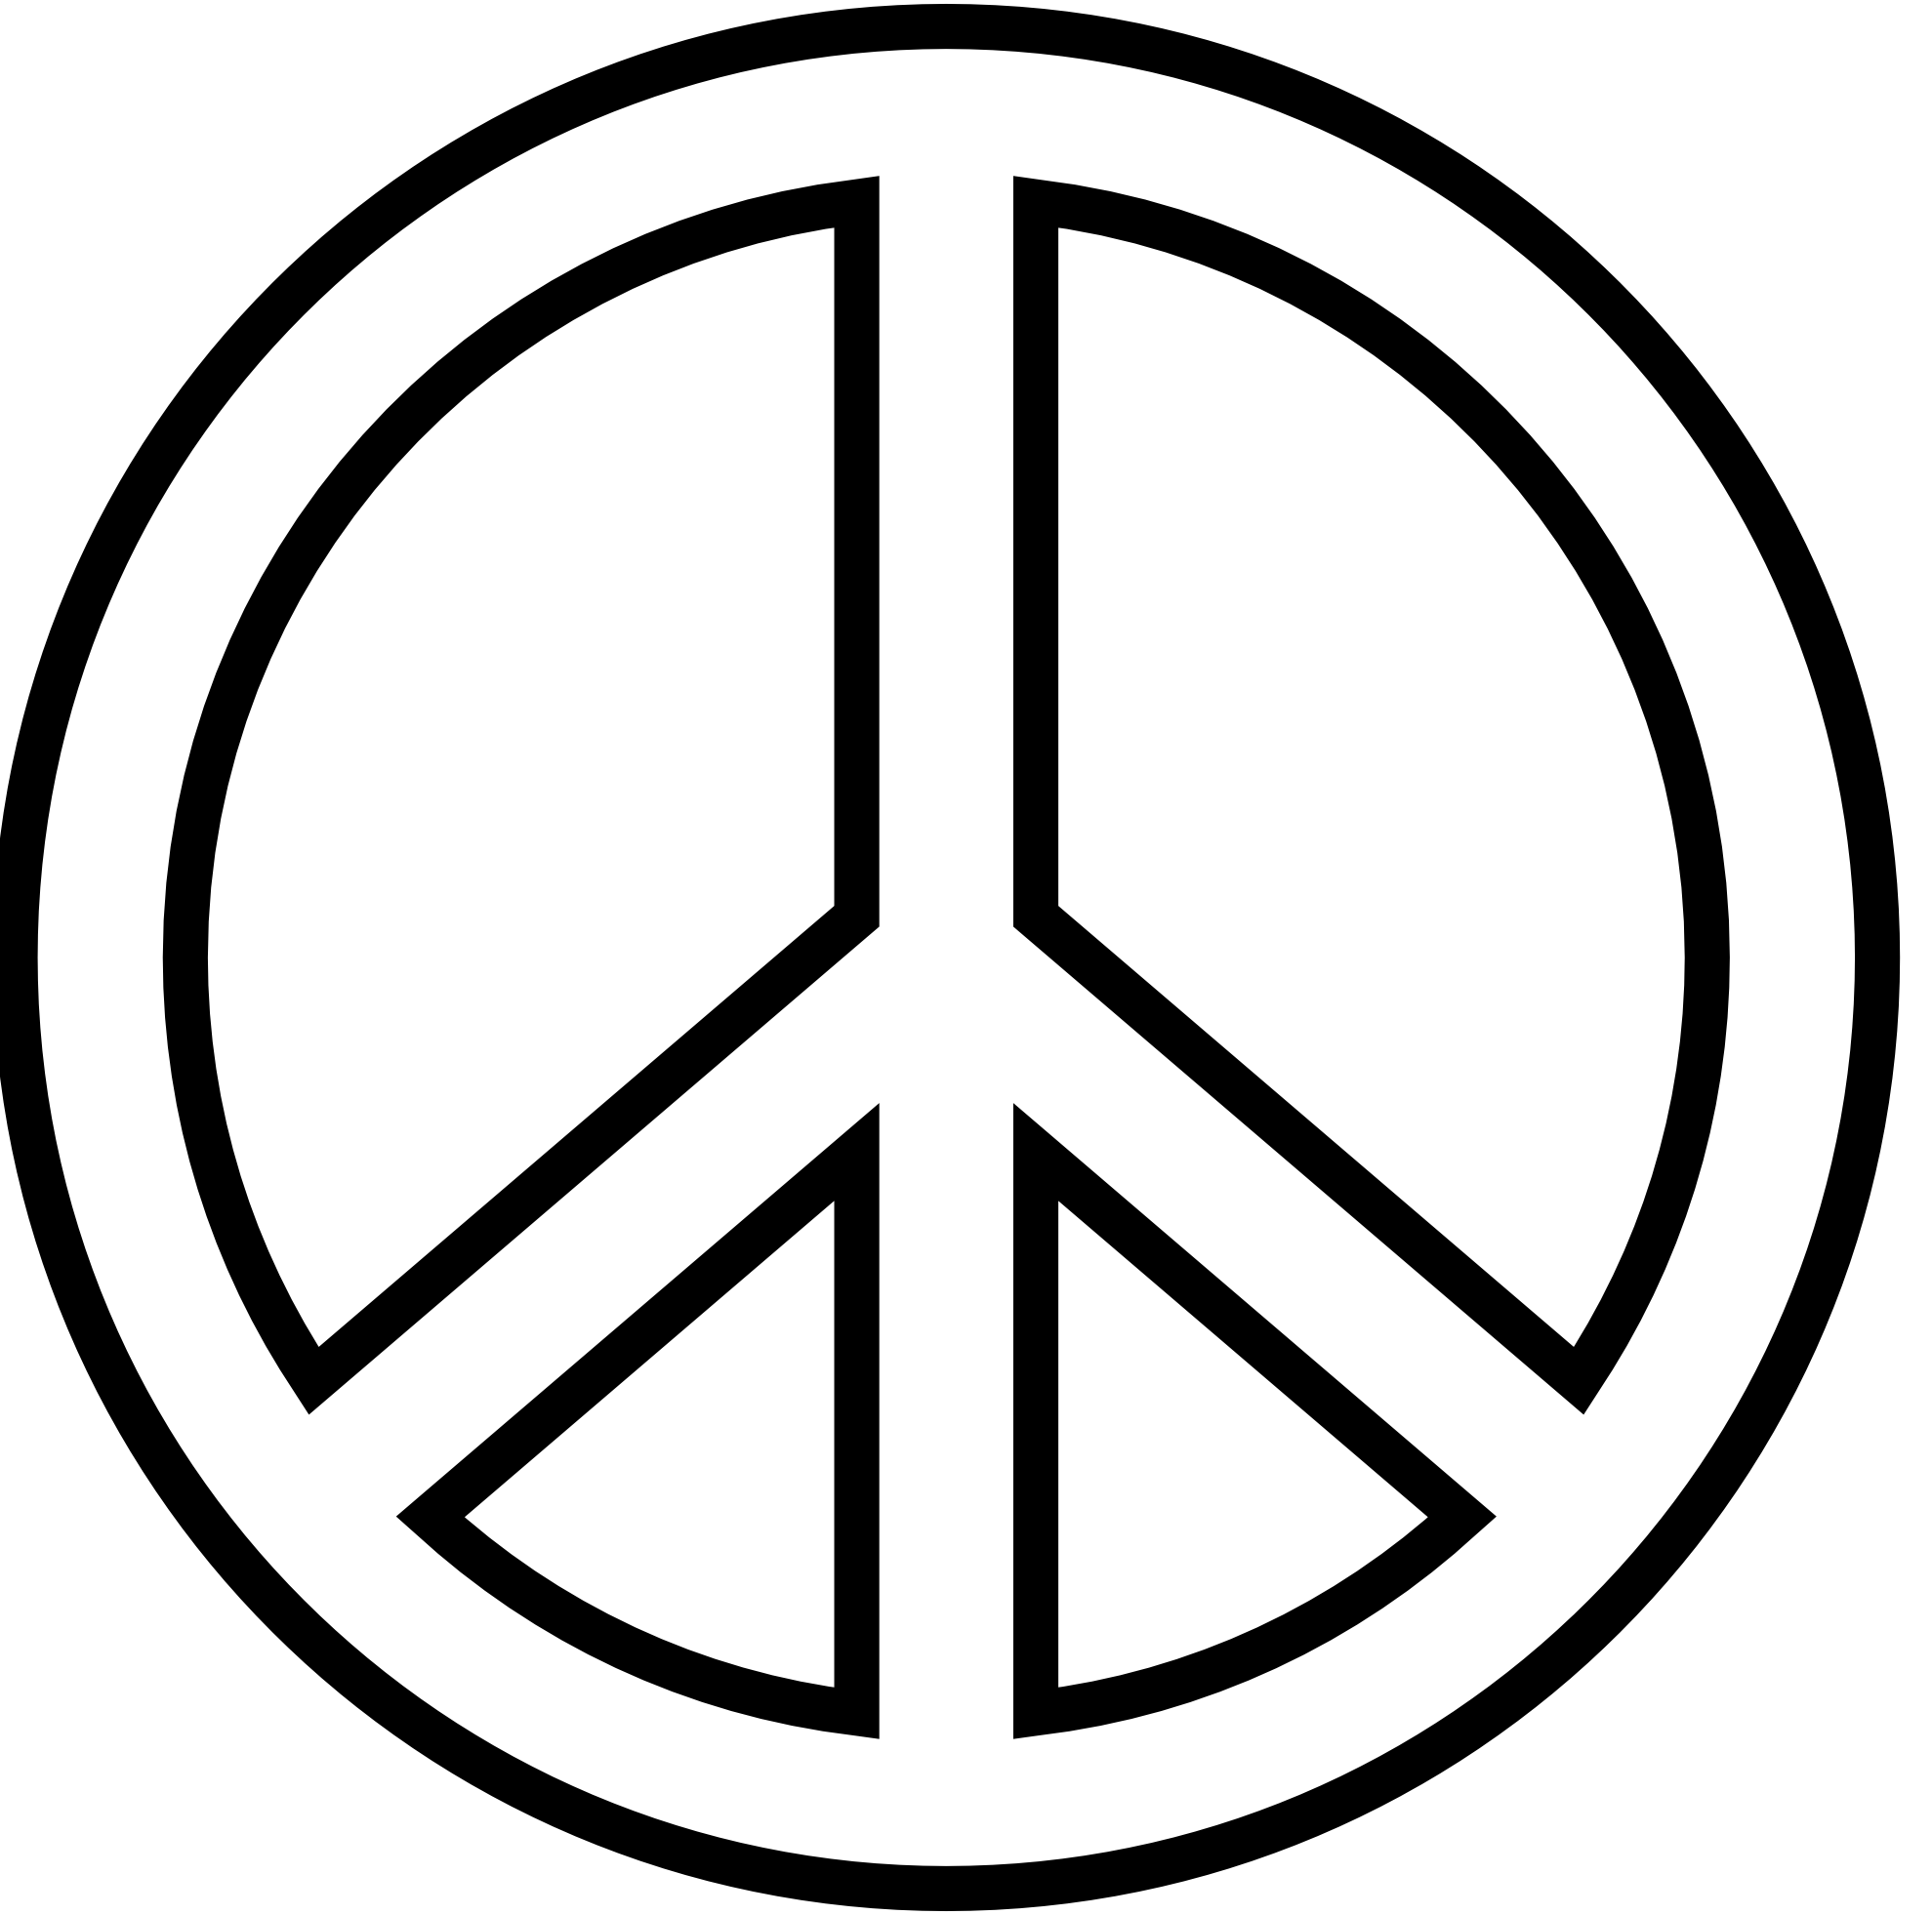 Peace Sign Images Free Clip Art - Cliparts.co